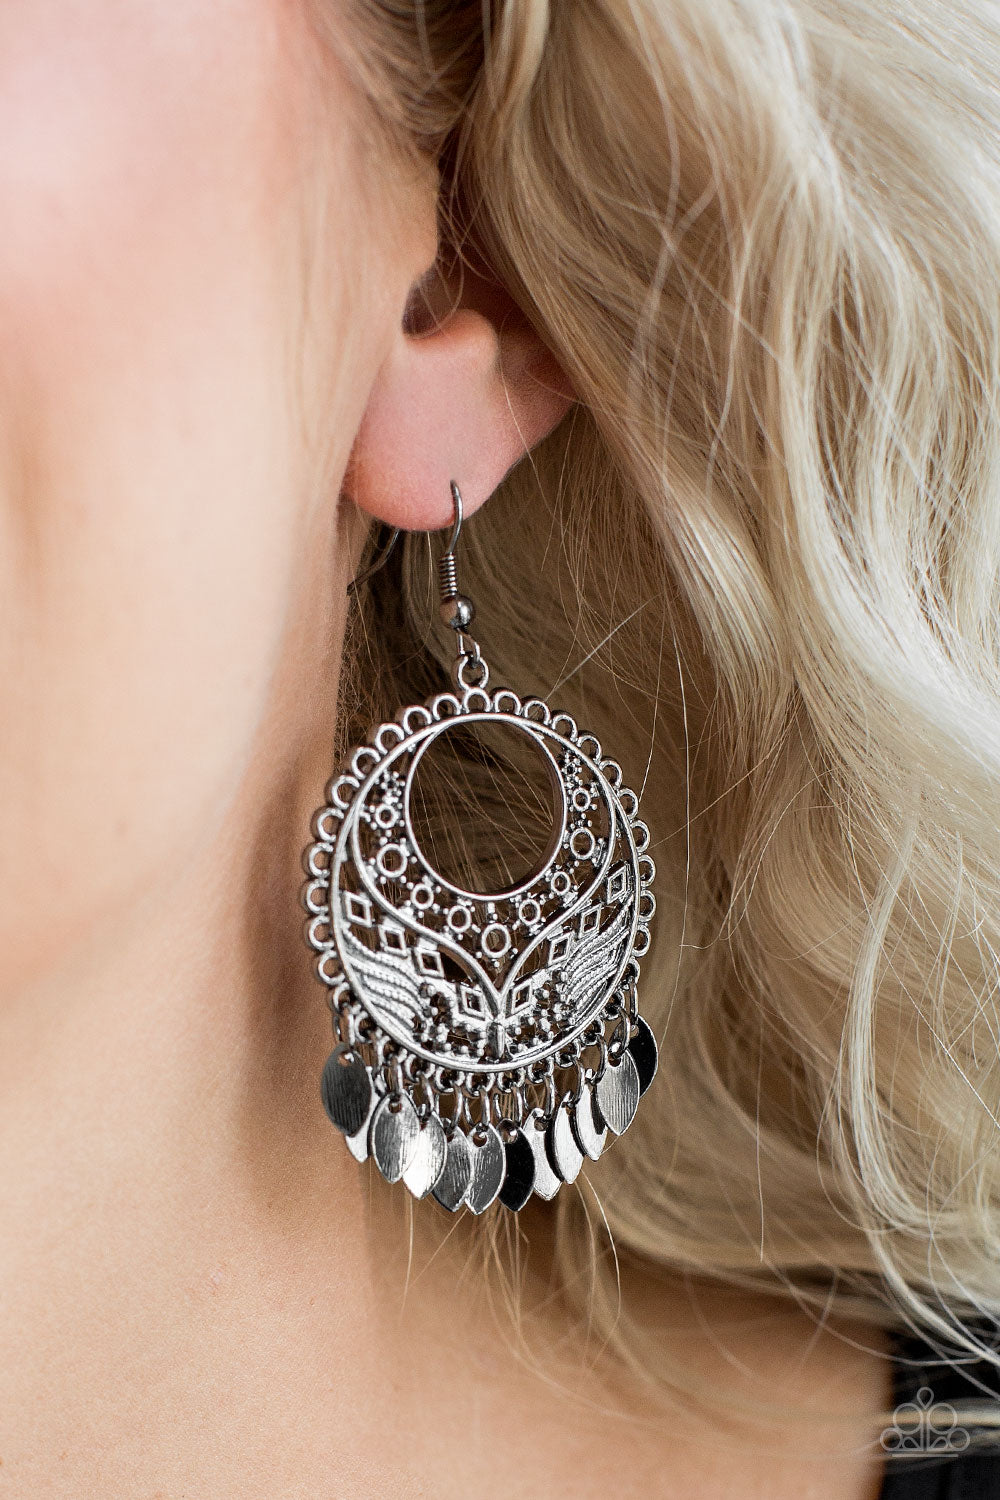 Far Off Horizons - Black Filigree Circle Earrings with Metal Fringe - Paparazzi Accessories - All That Sparkles XOXO